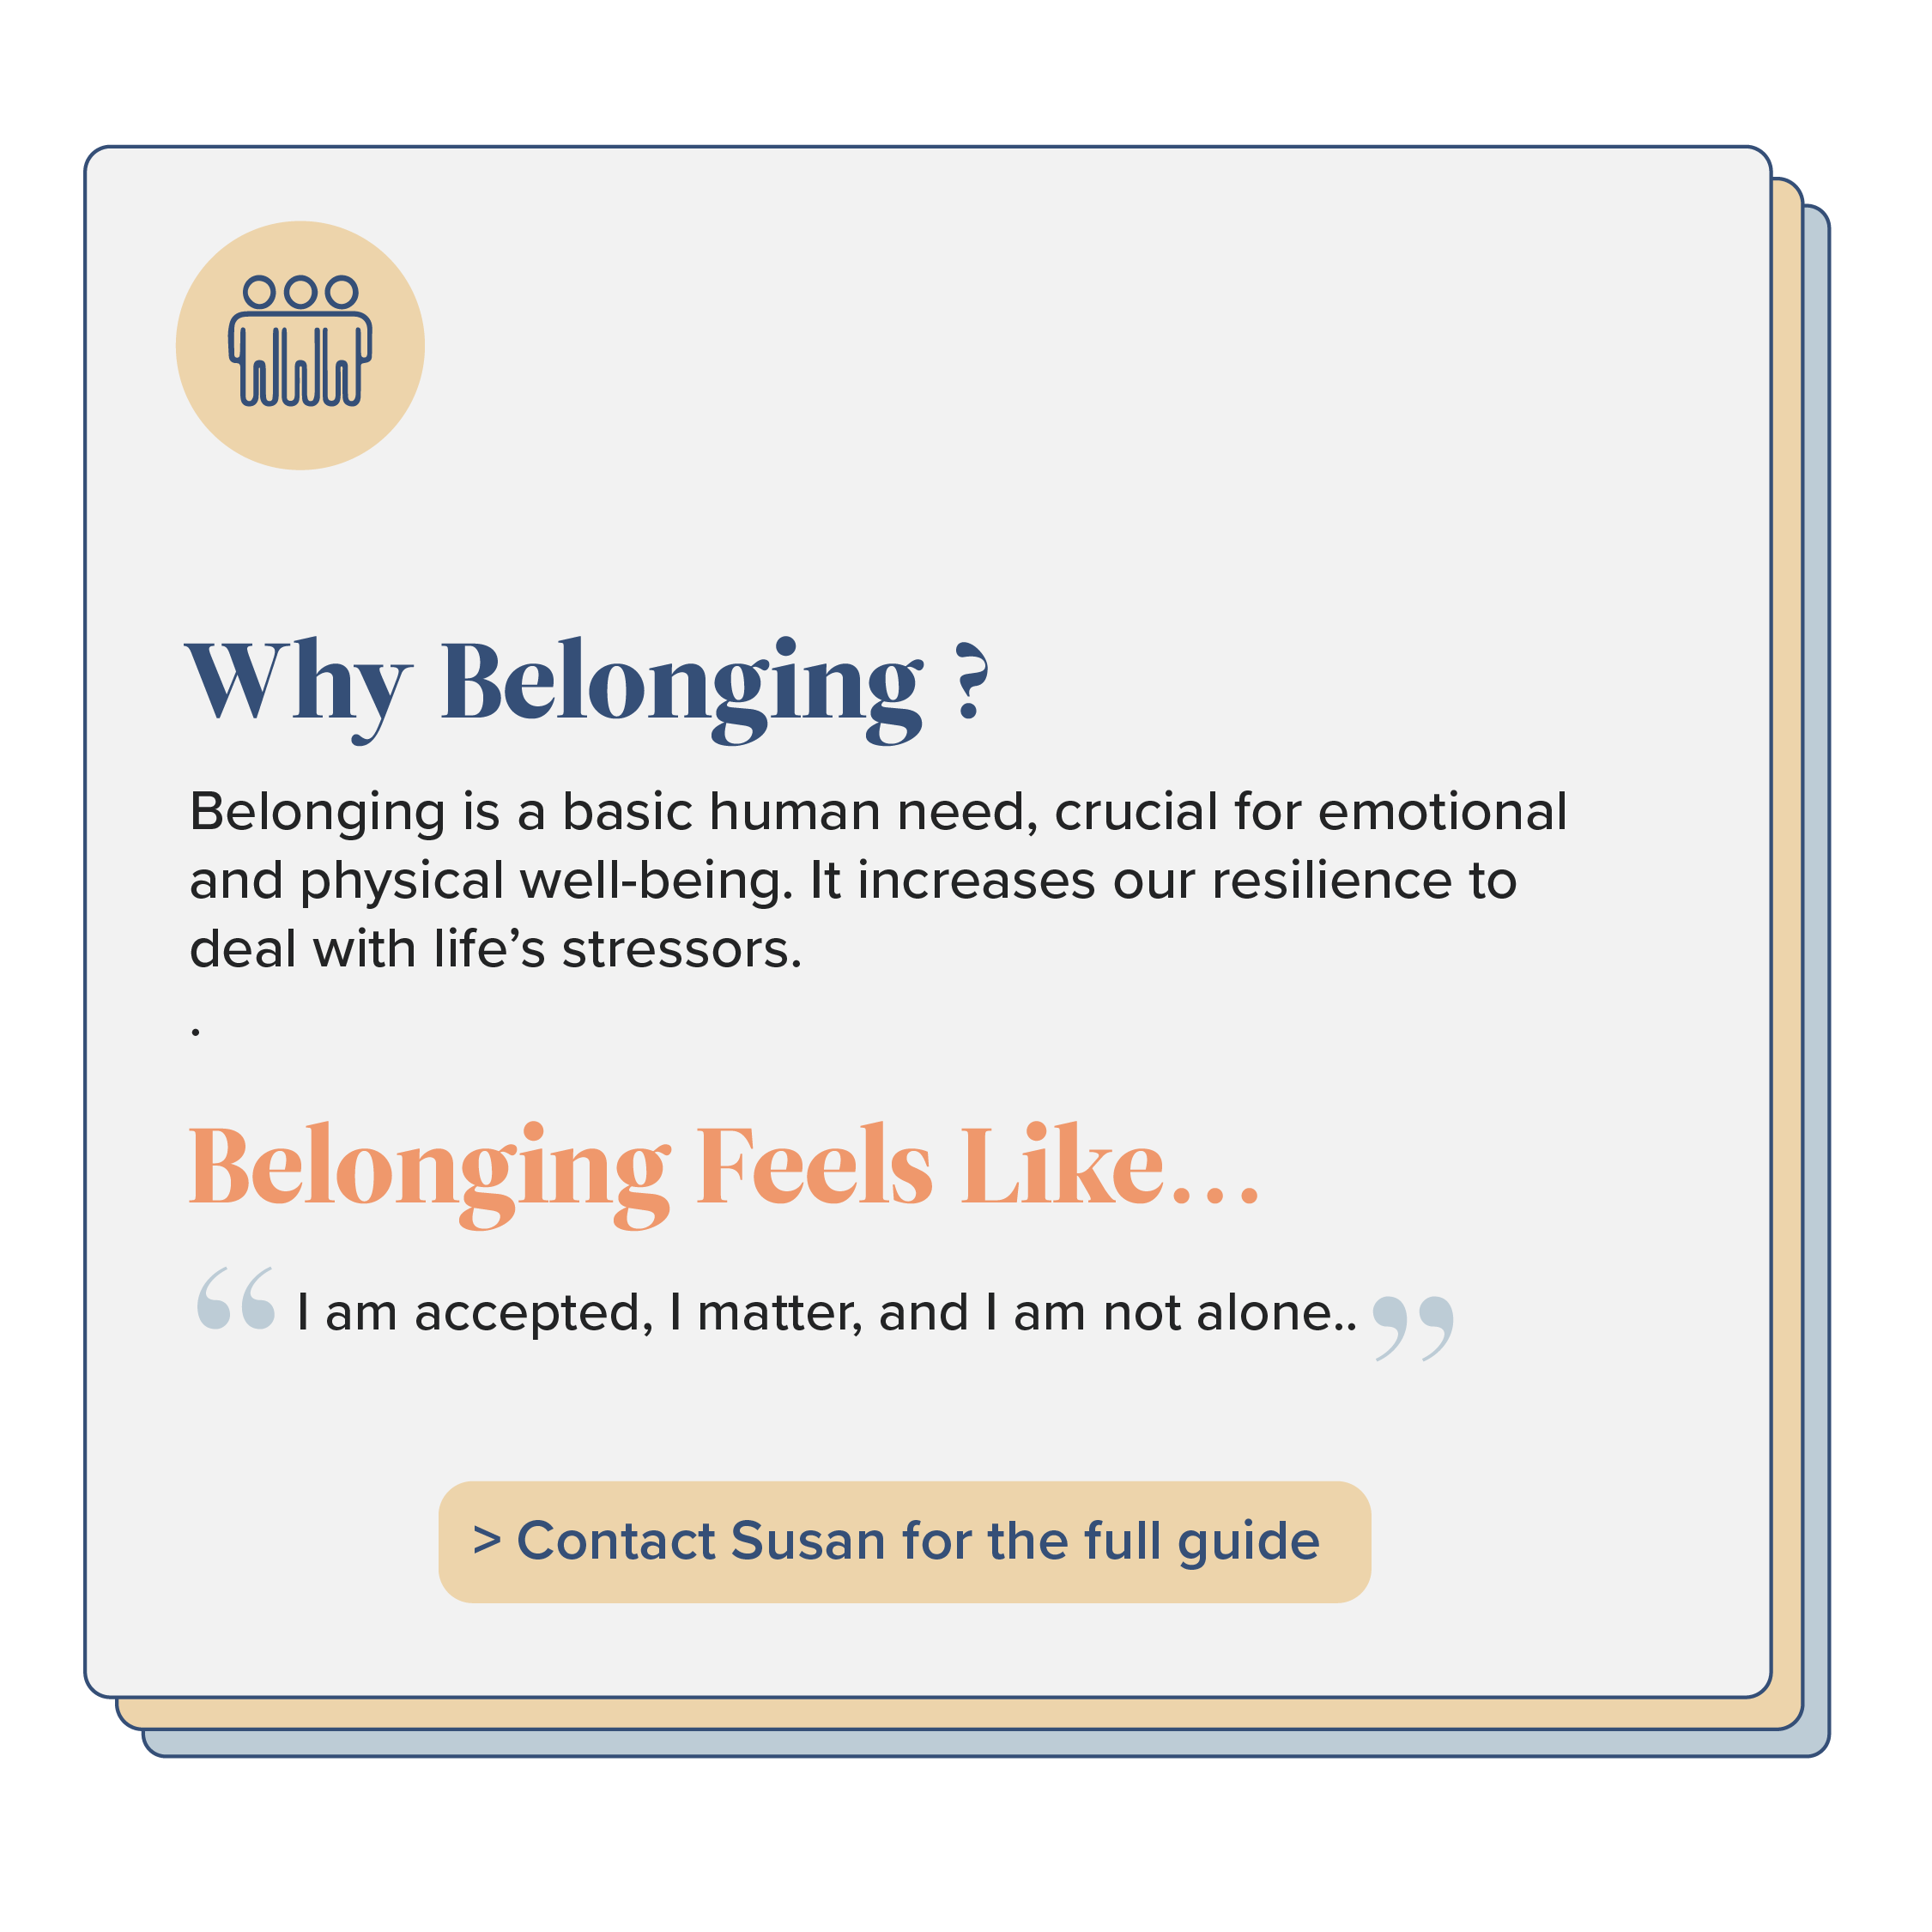 Belonging is a basic human need, crucial for emotional and physical well-being. It increases our resilience to deal with life’s stressors and gives us the feeling we aren’t alone.